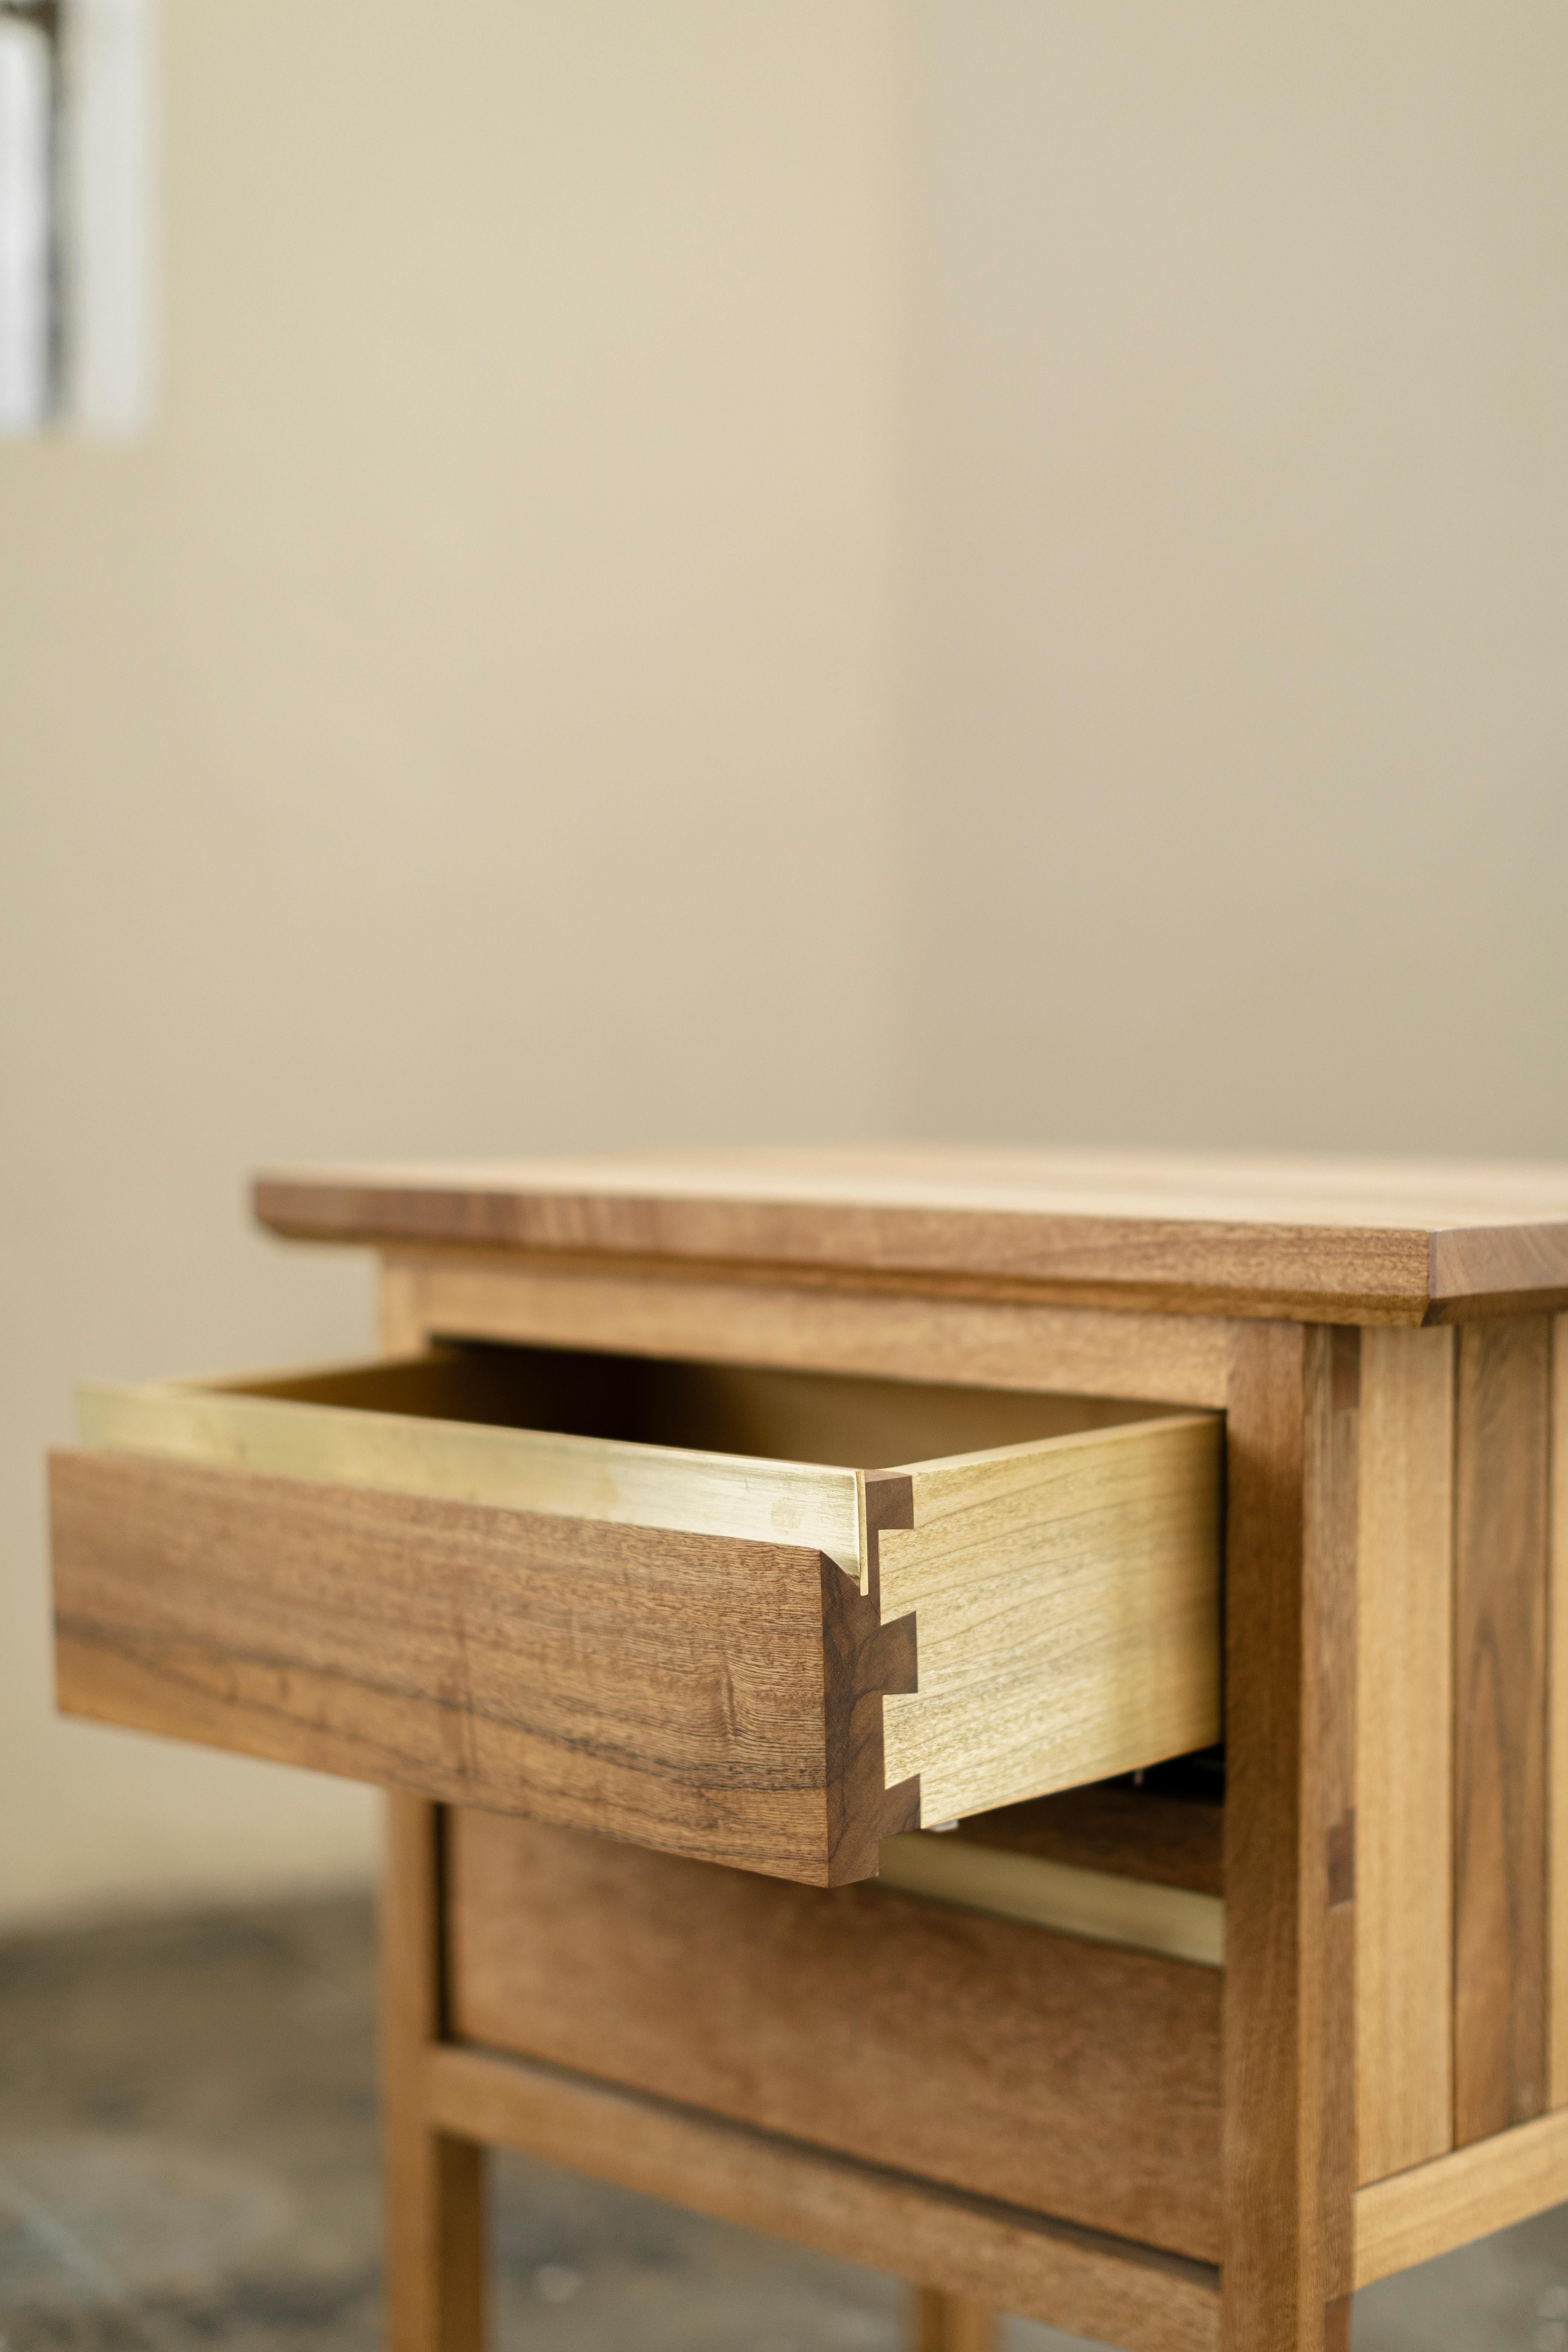 HB collection wooden nightstand made of oak or tzalam wood. Brass details in the drawer.